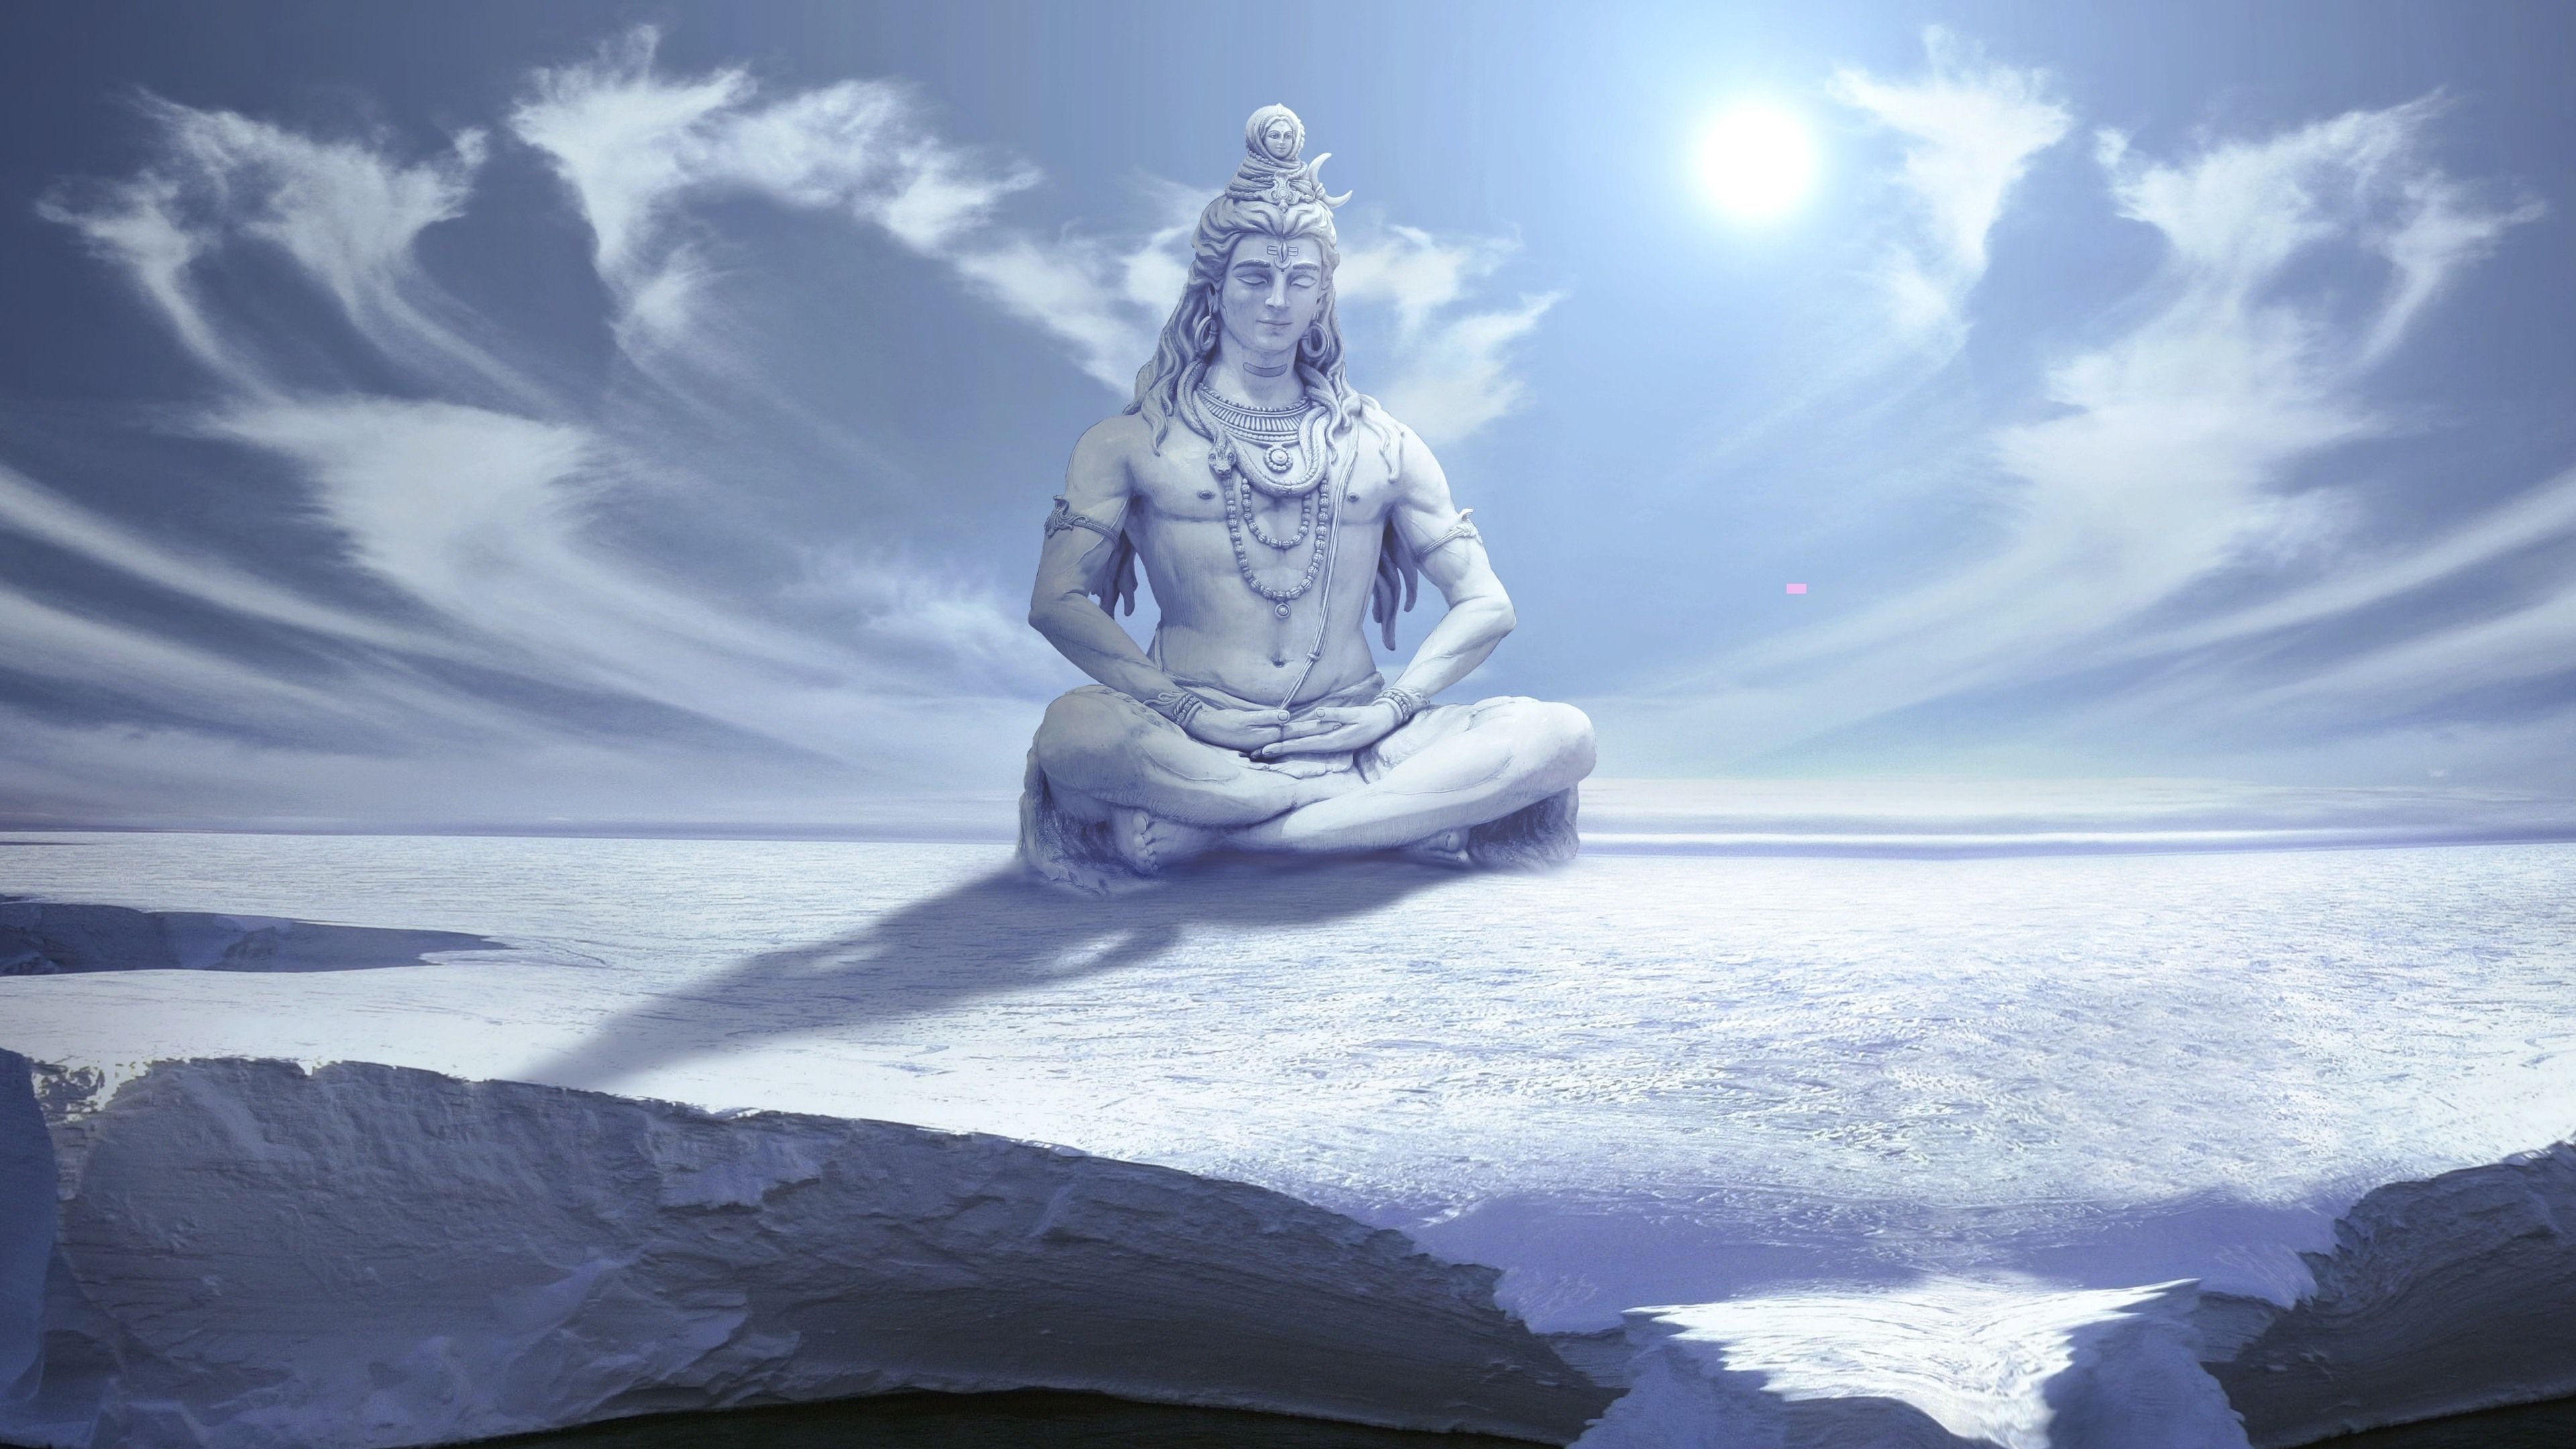 Lord Shiva 4k Wallpapers For Pc - carrotapp